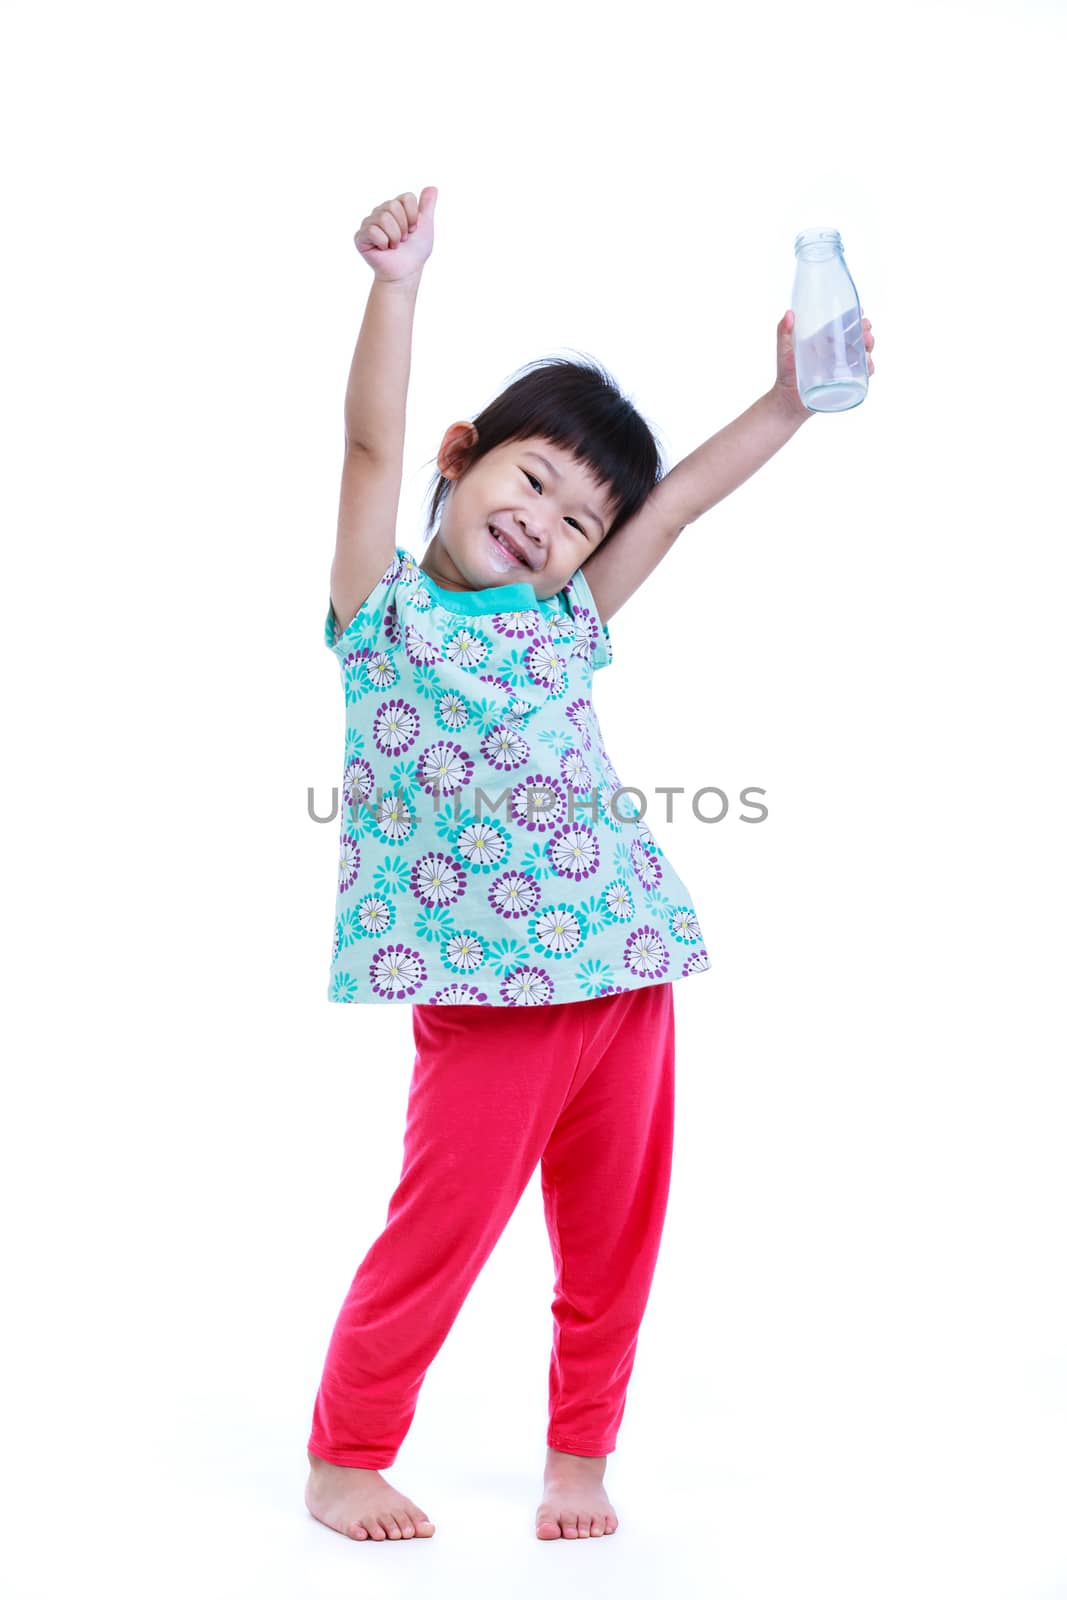 Full body. Fun portrait of pretty asian girl smiling and showing bottle of milk. Drinking milk for good health. Child looking at camera with thumb up, on white background. Studio shoot.